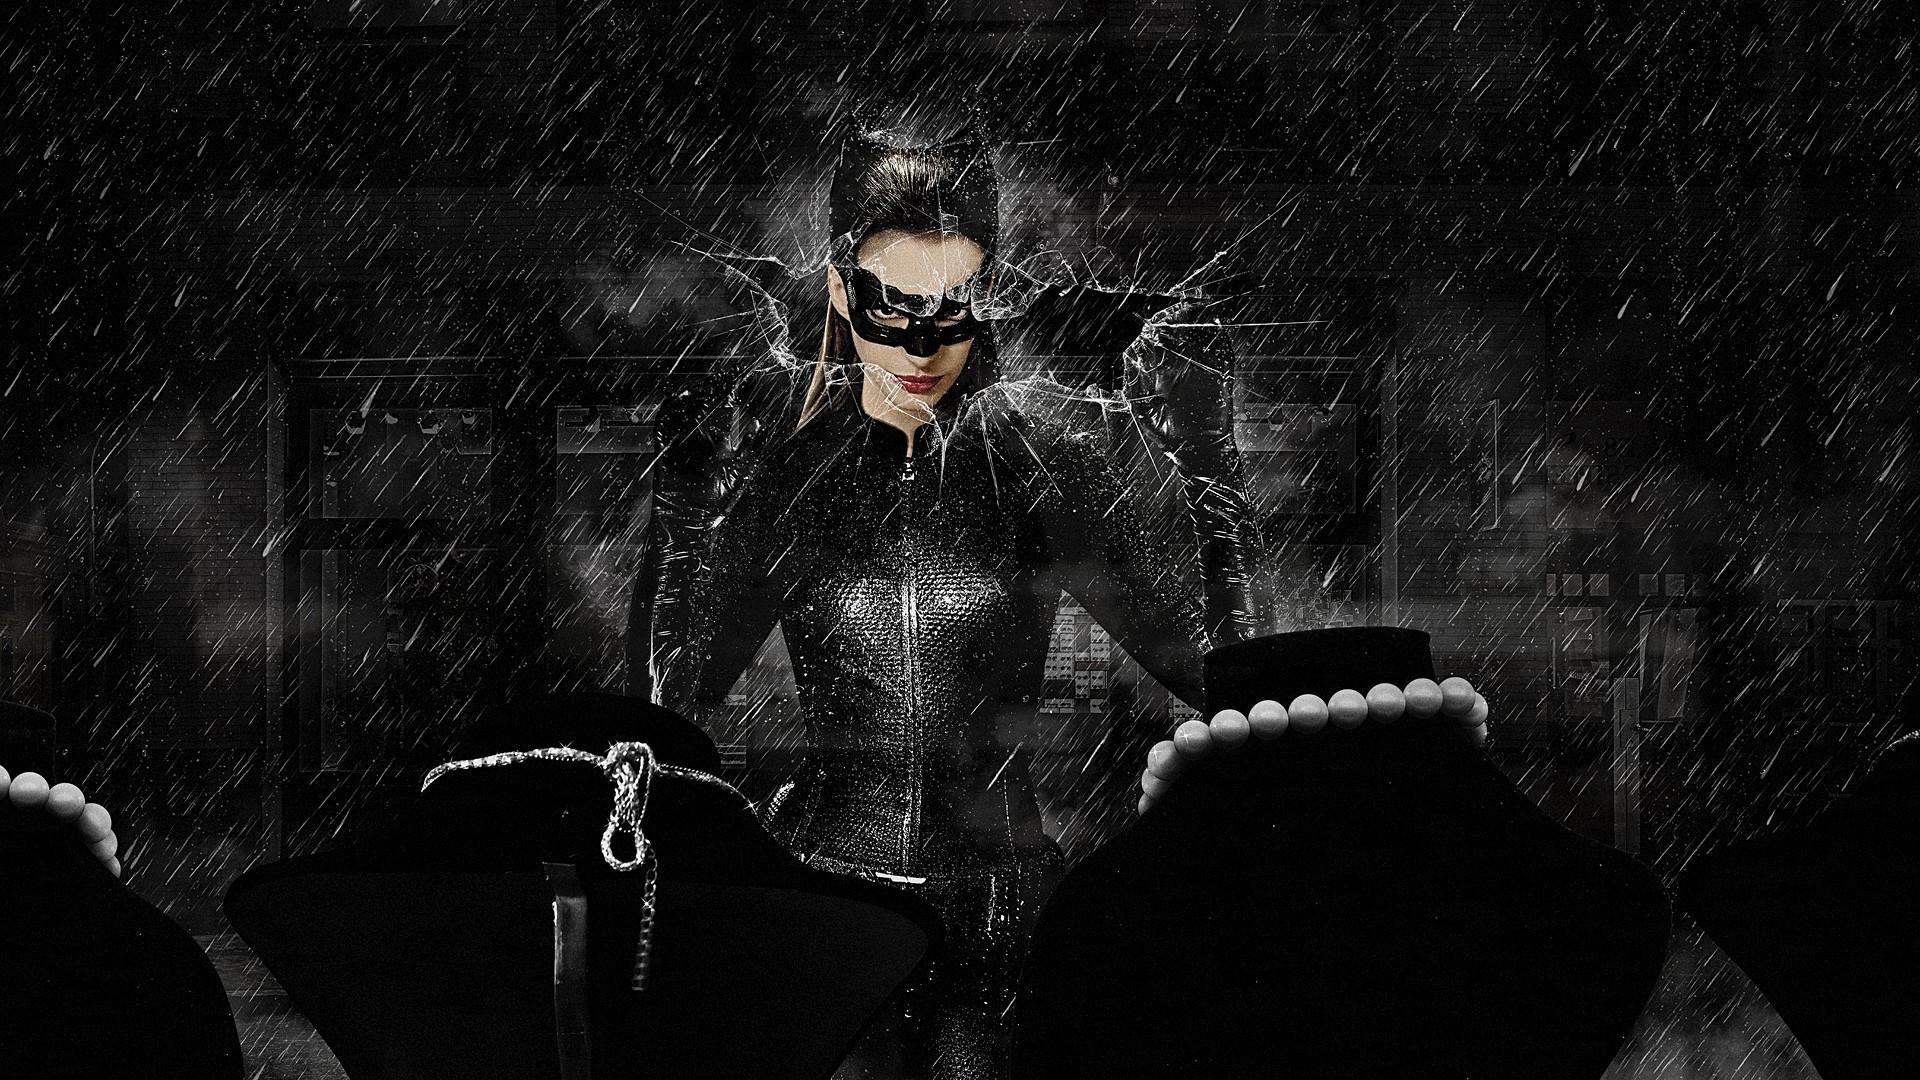 Sizzling Anne Hathaway Catwoman Wallpaper